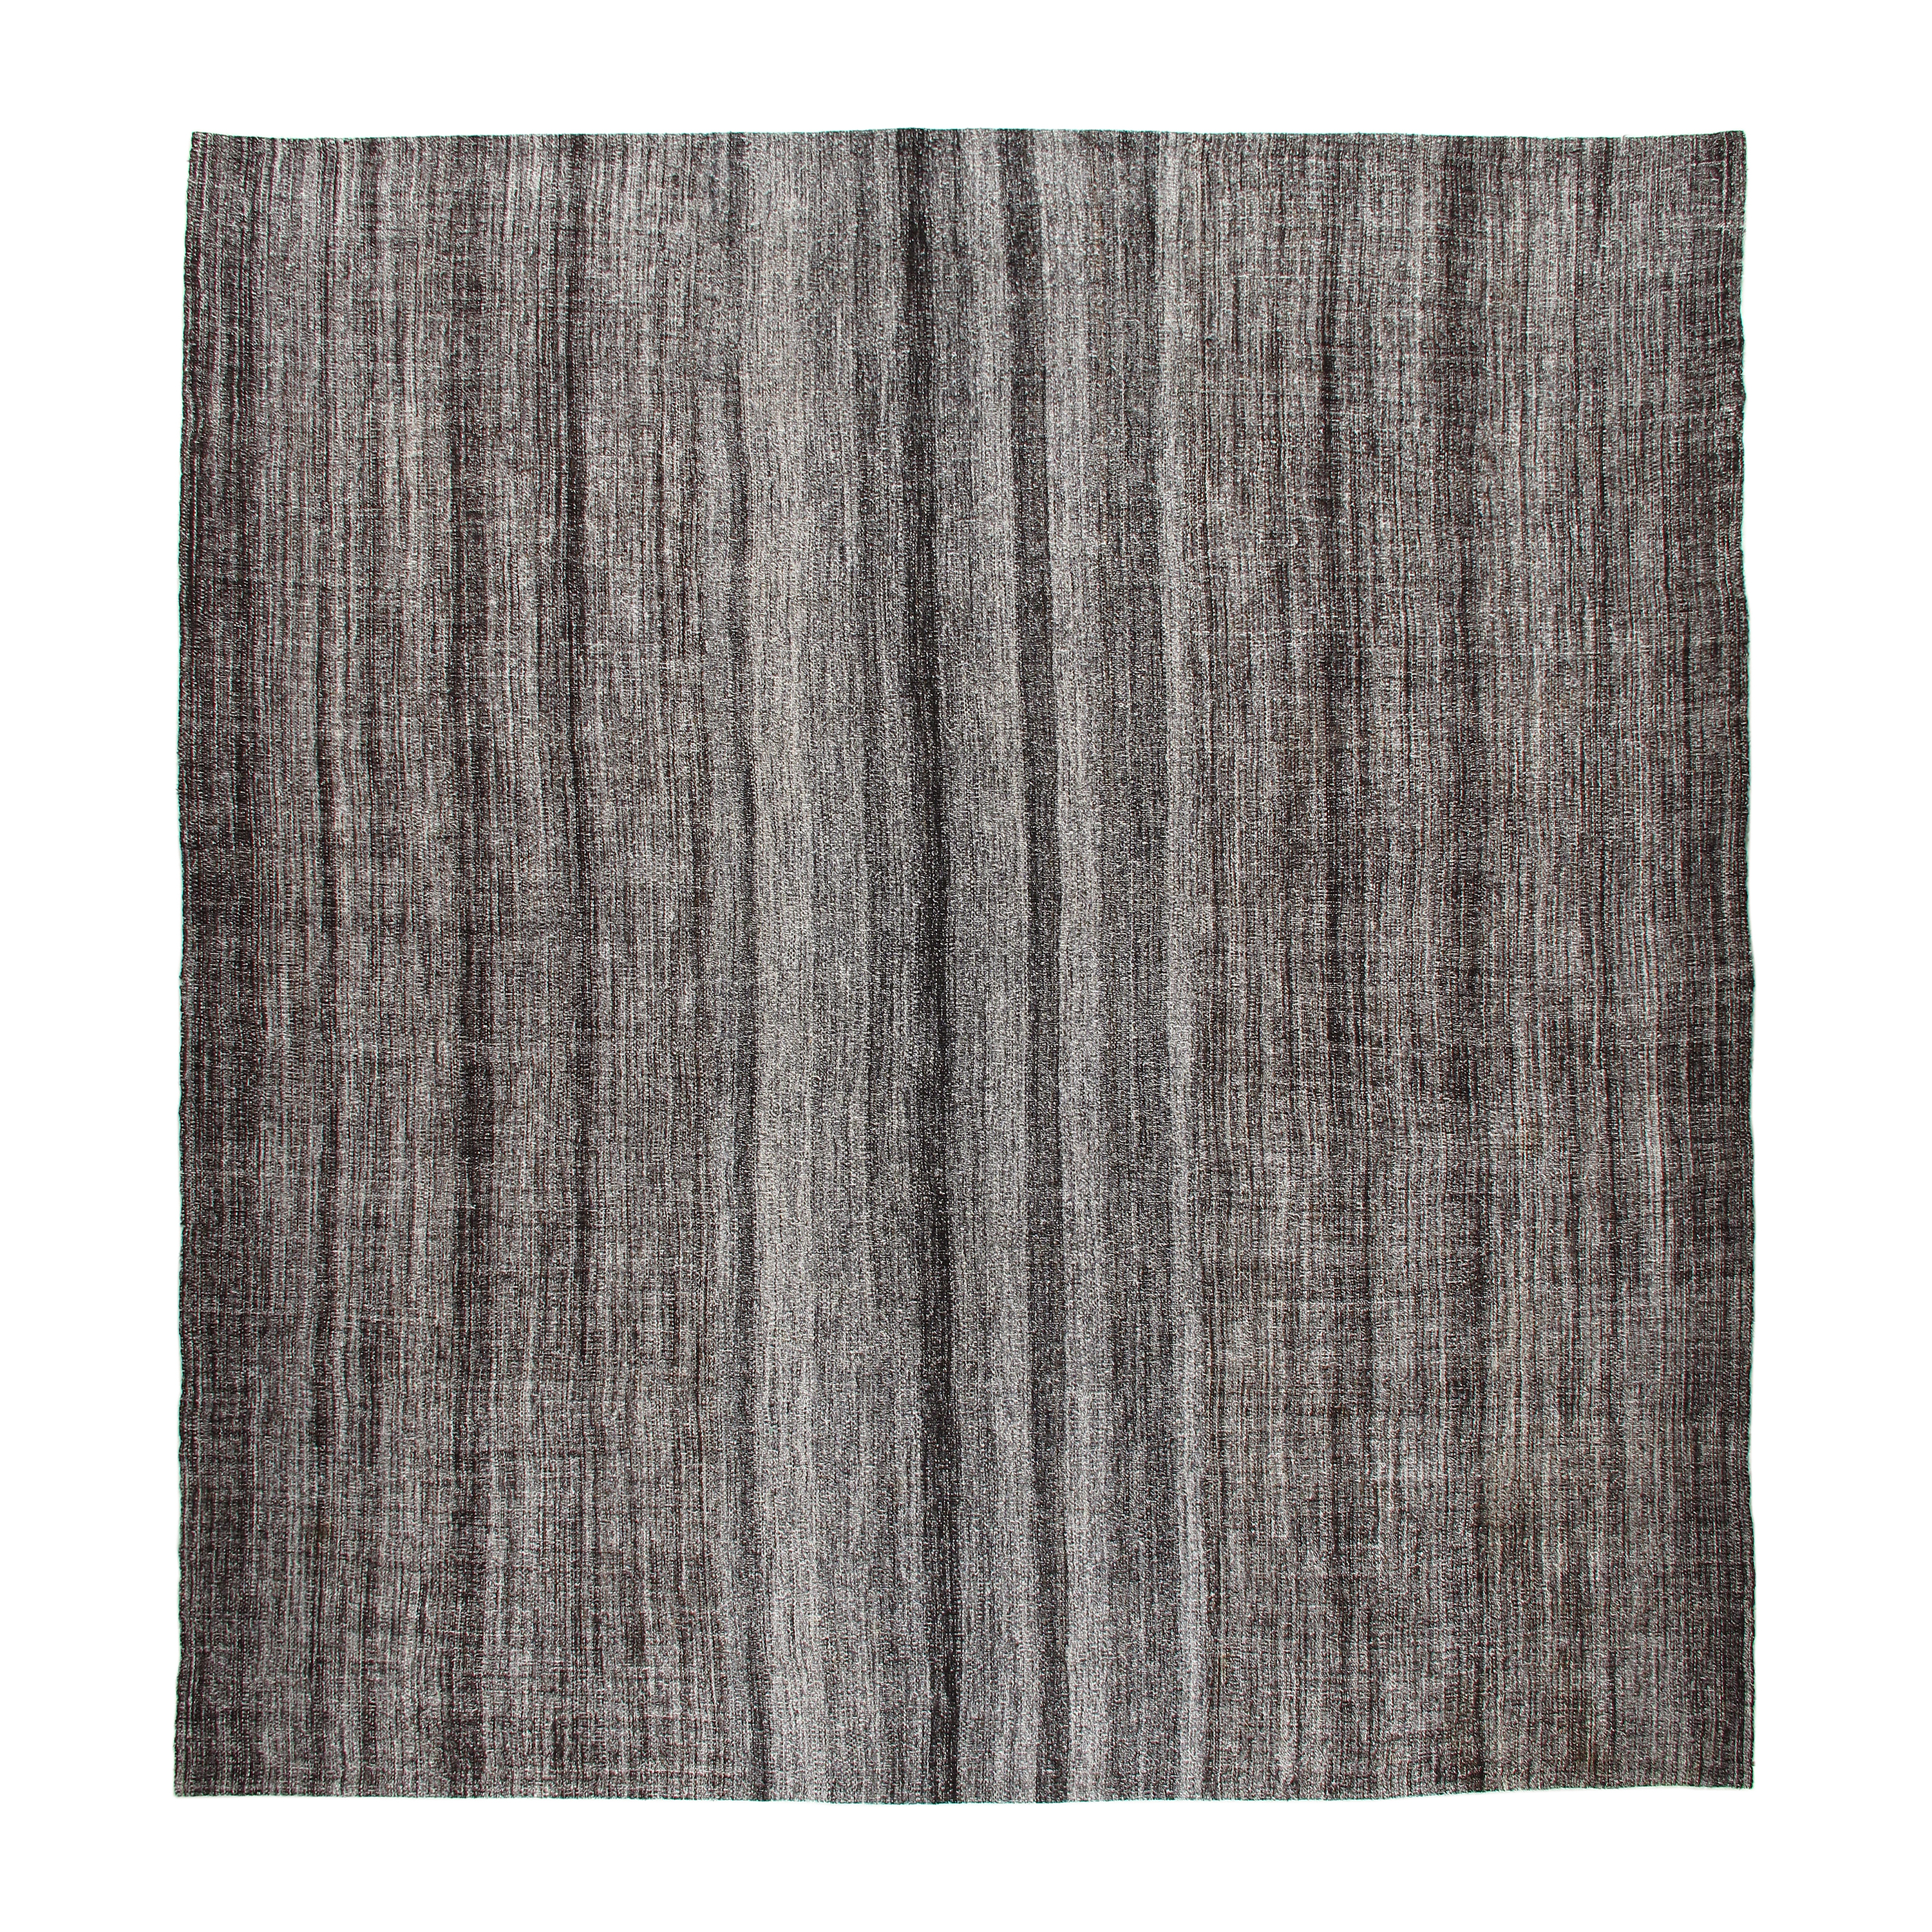 This Vintage flatweave is hand-woven using wool and cotton. 